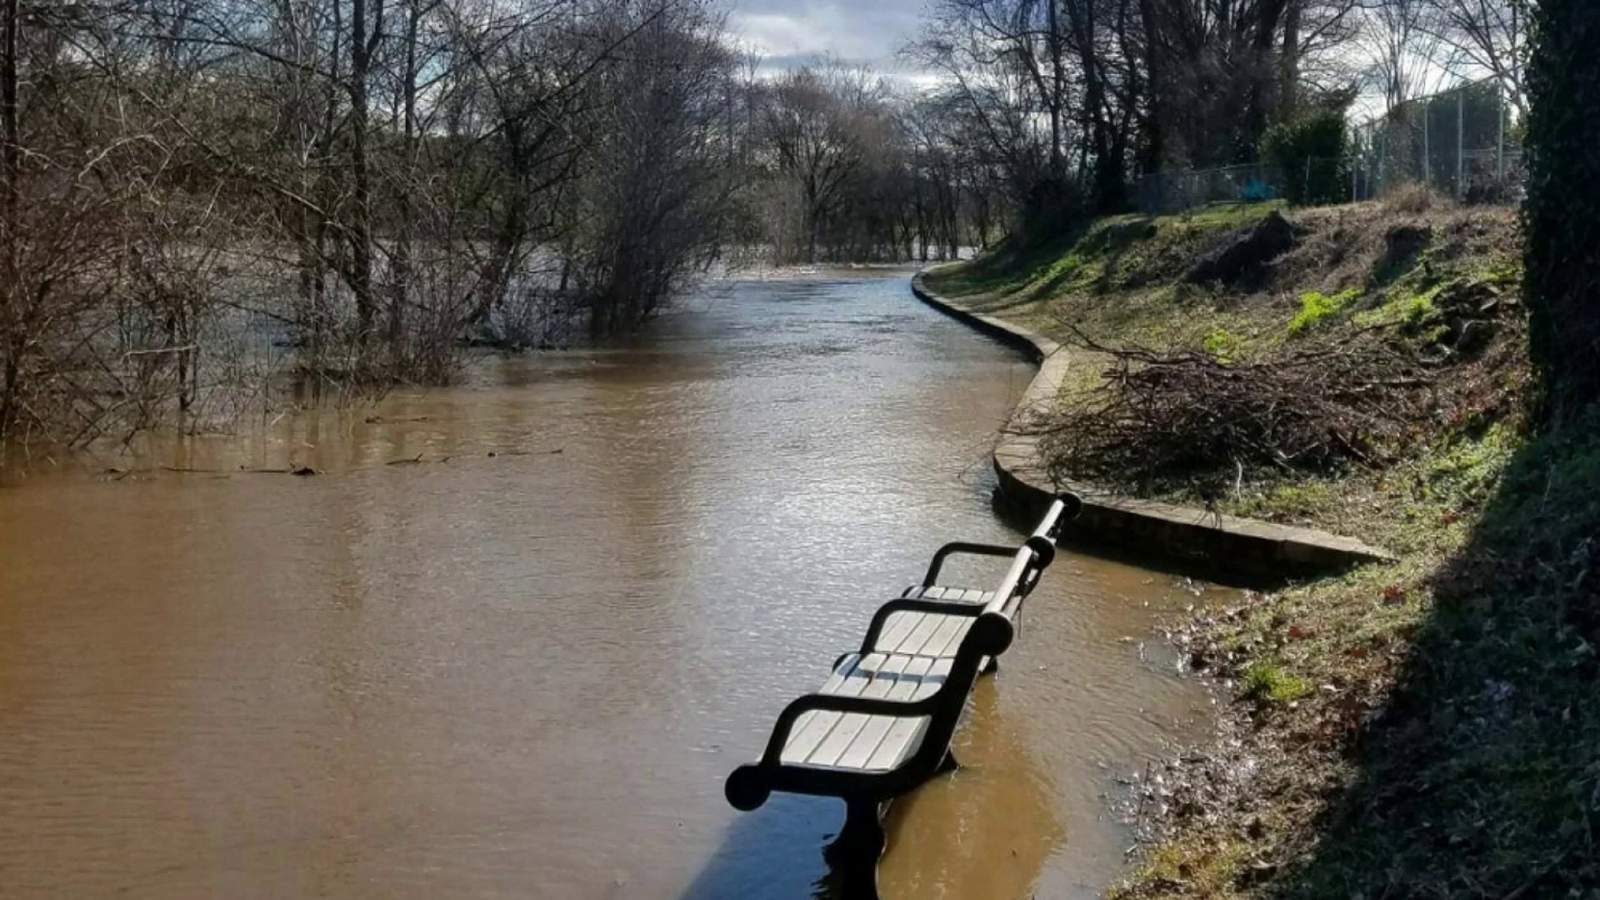 Section of Roanoke River Greenway closed due to rain damage